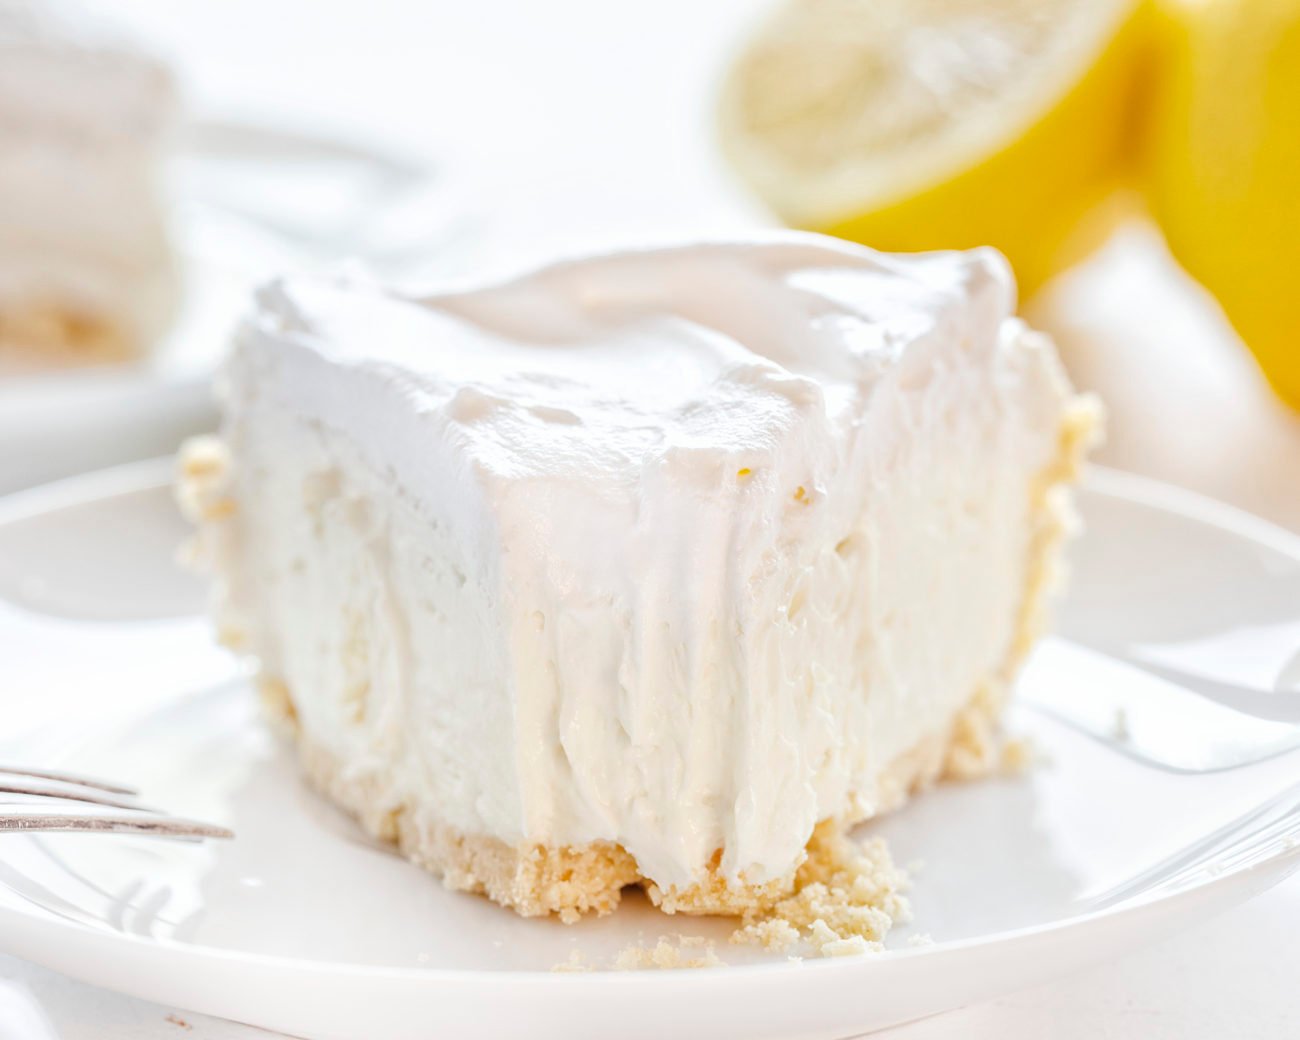 Lemon Mousse Pie on a Plate with a Bite Removed with a Fork.